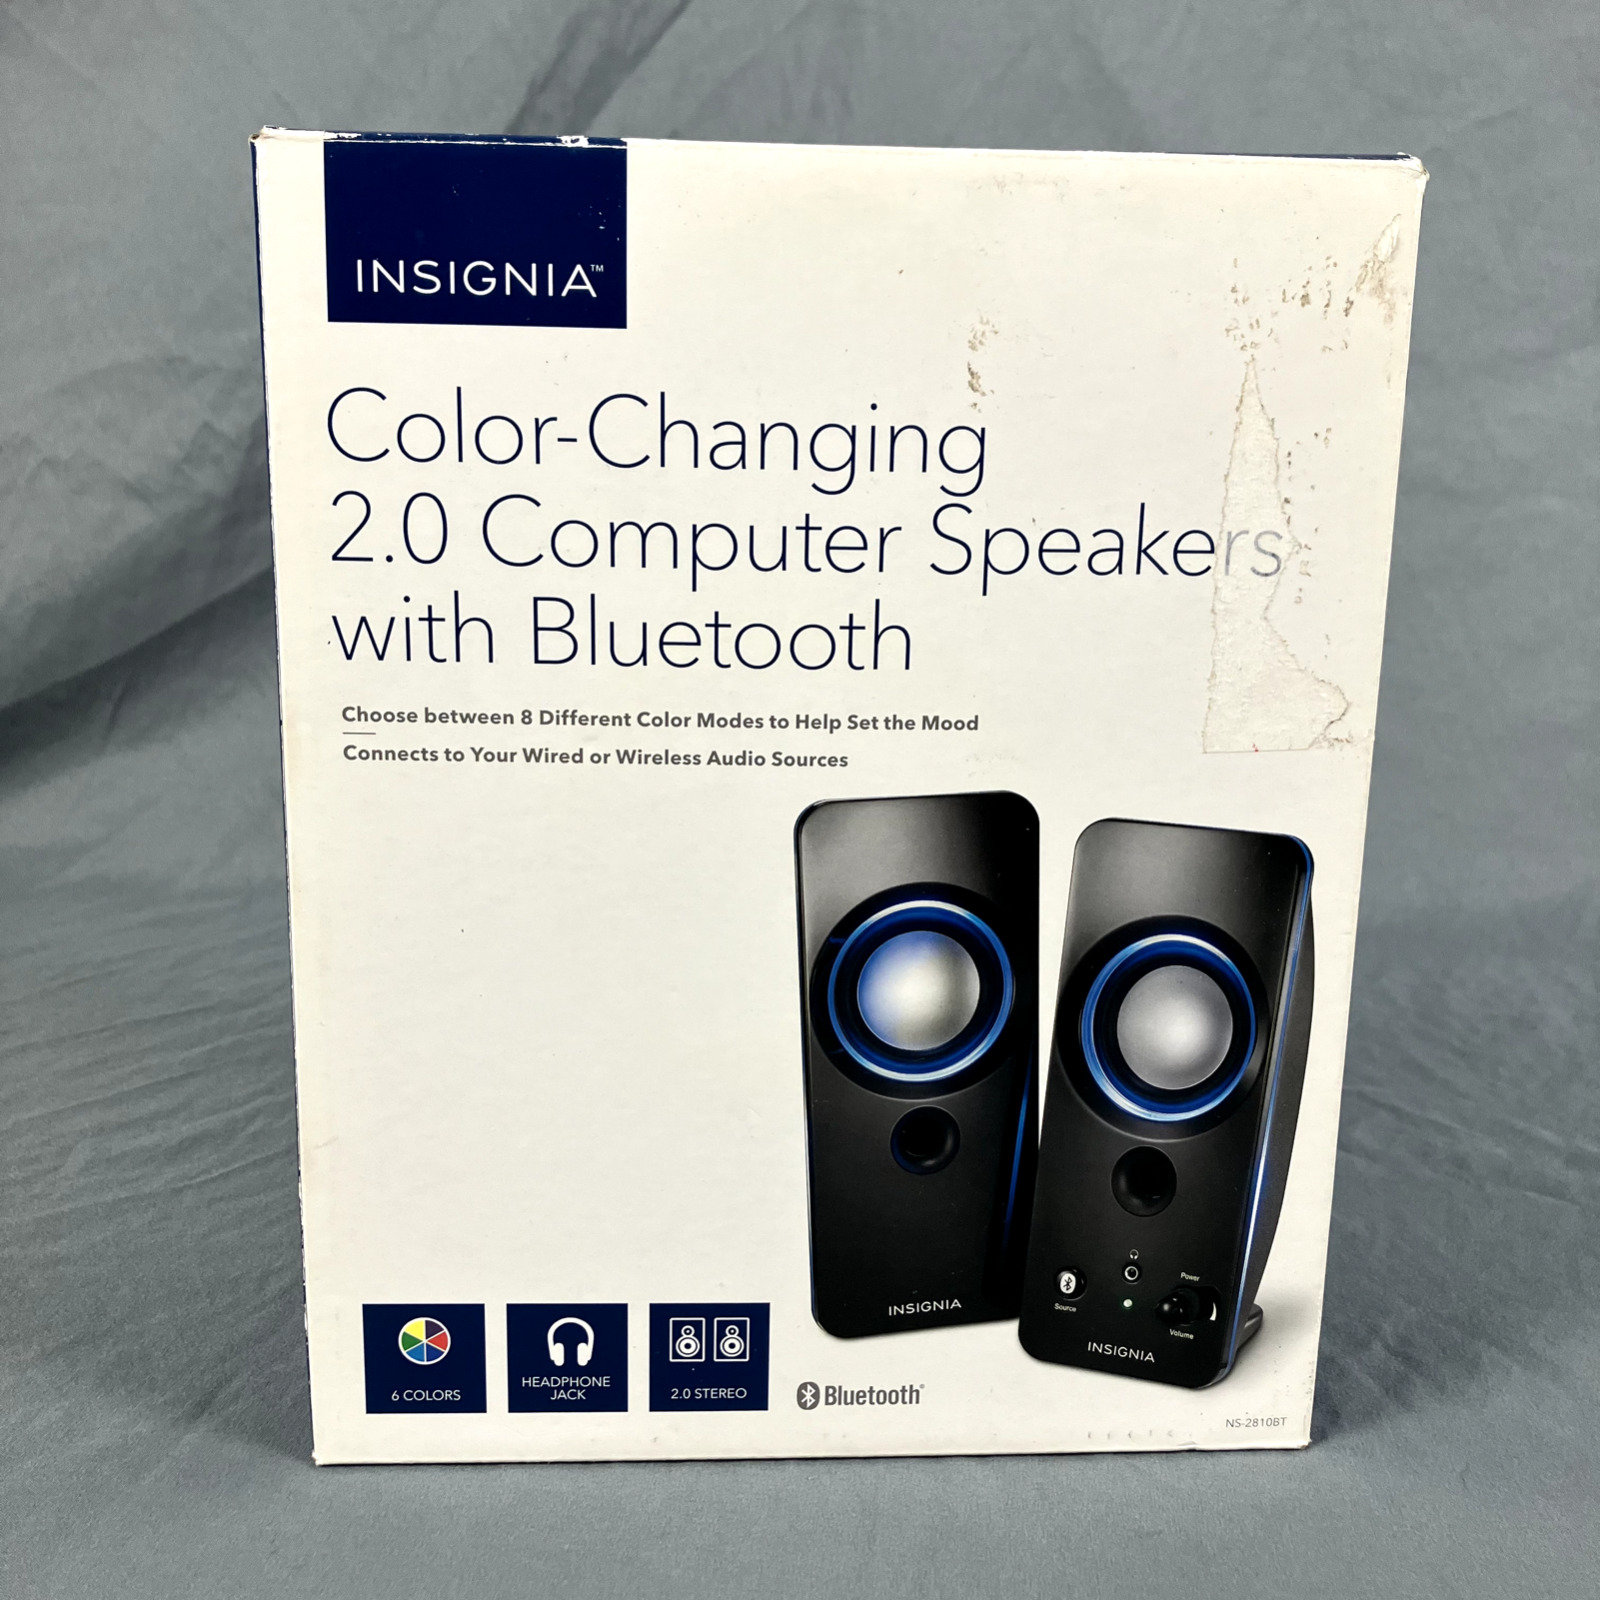 INSIGNIA Color Changing 2.0 Computer Speakers Bluetooth NS-2810BT Dorms Tested